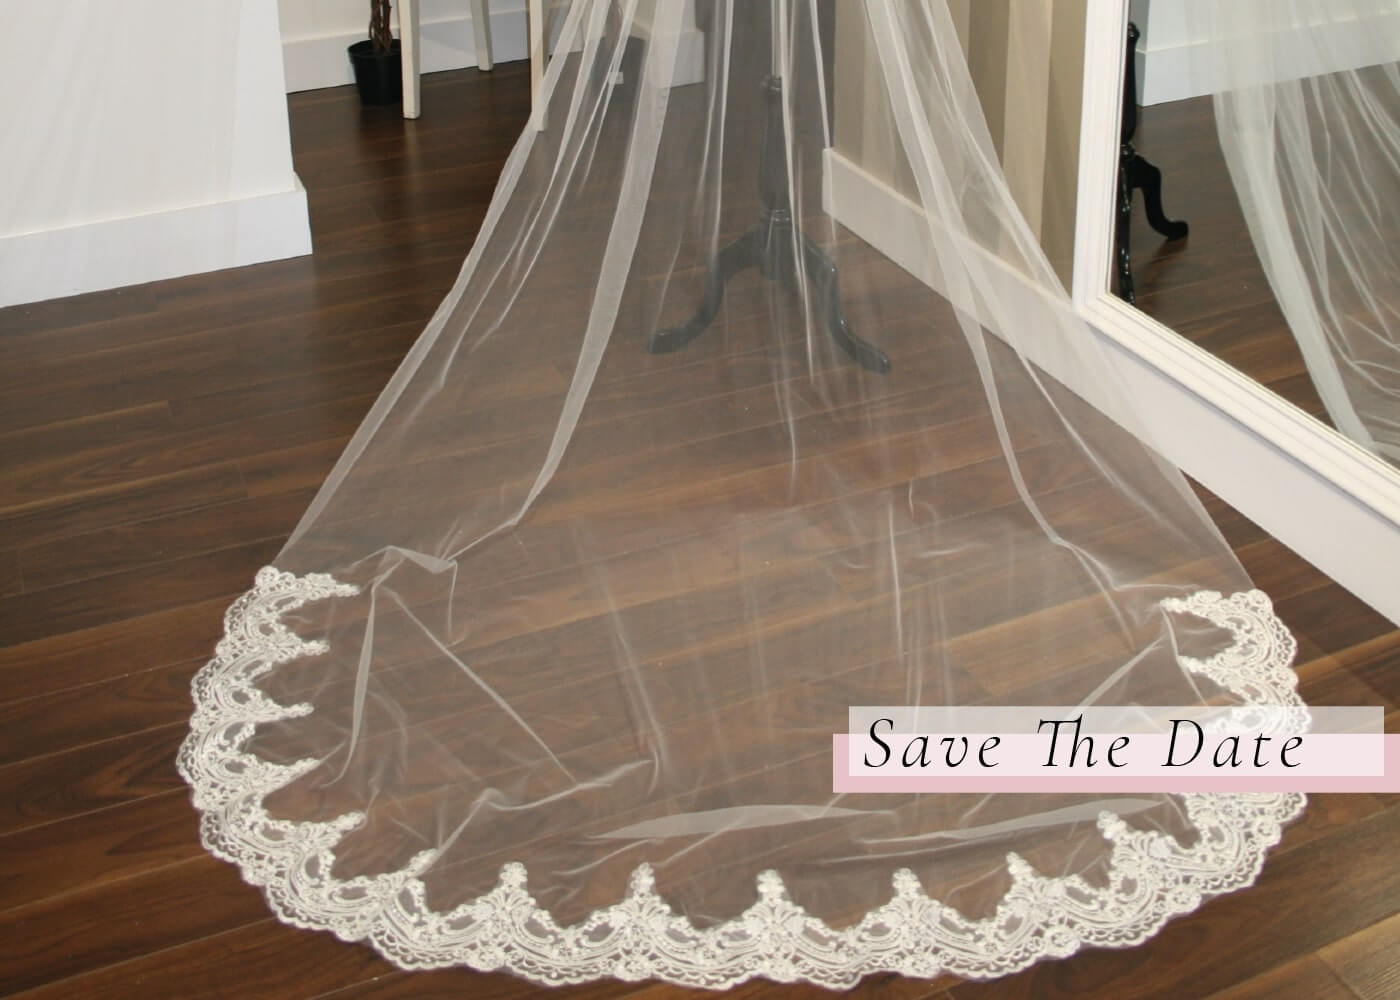 Save The Date Bridal Veil